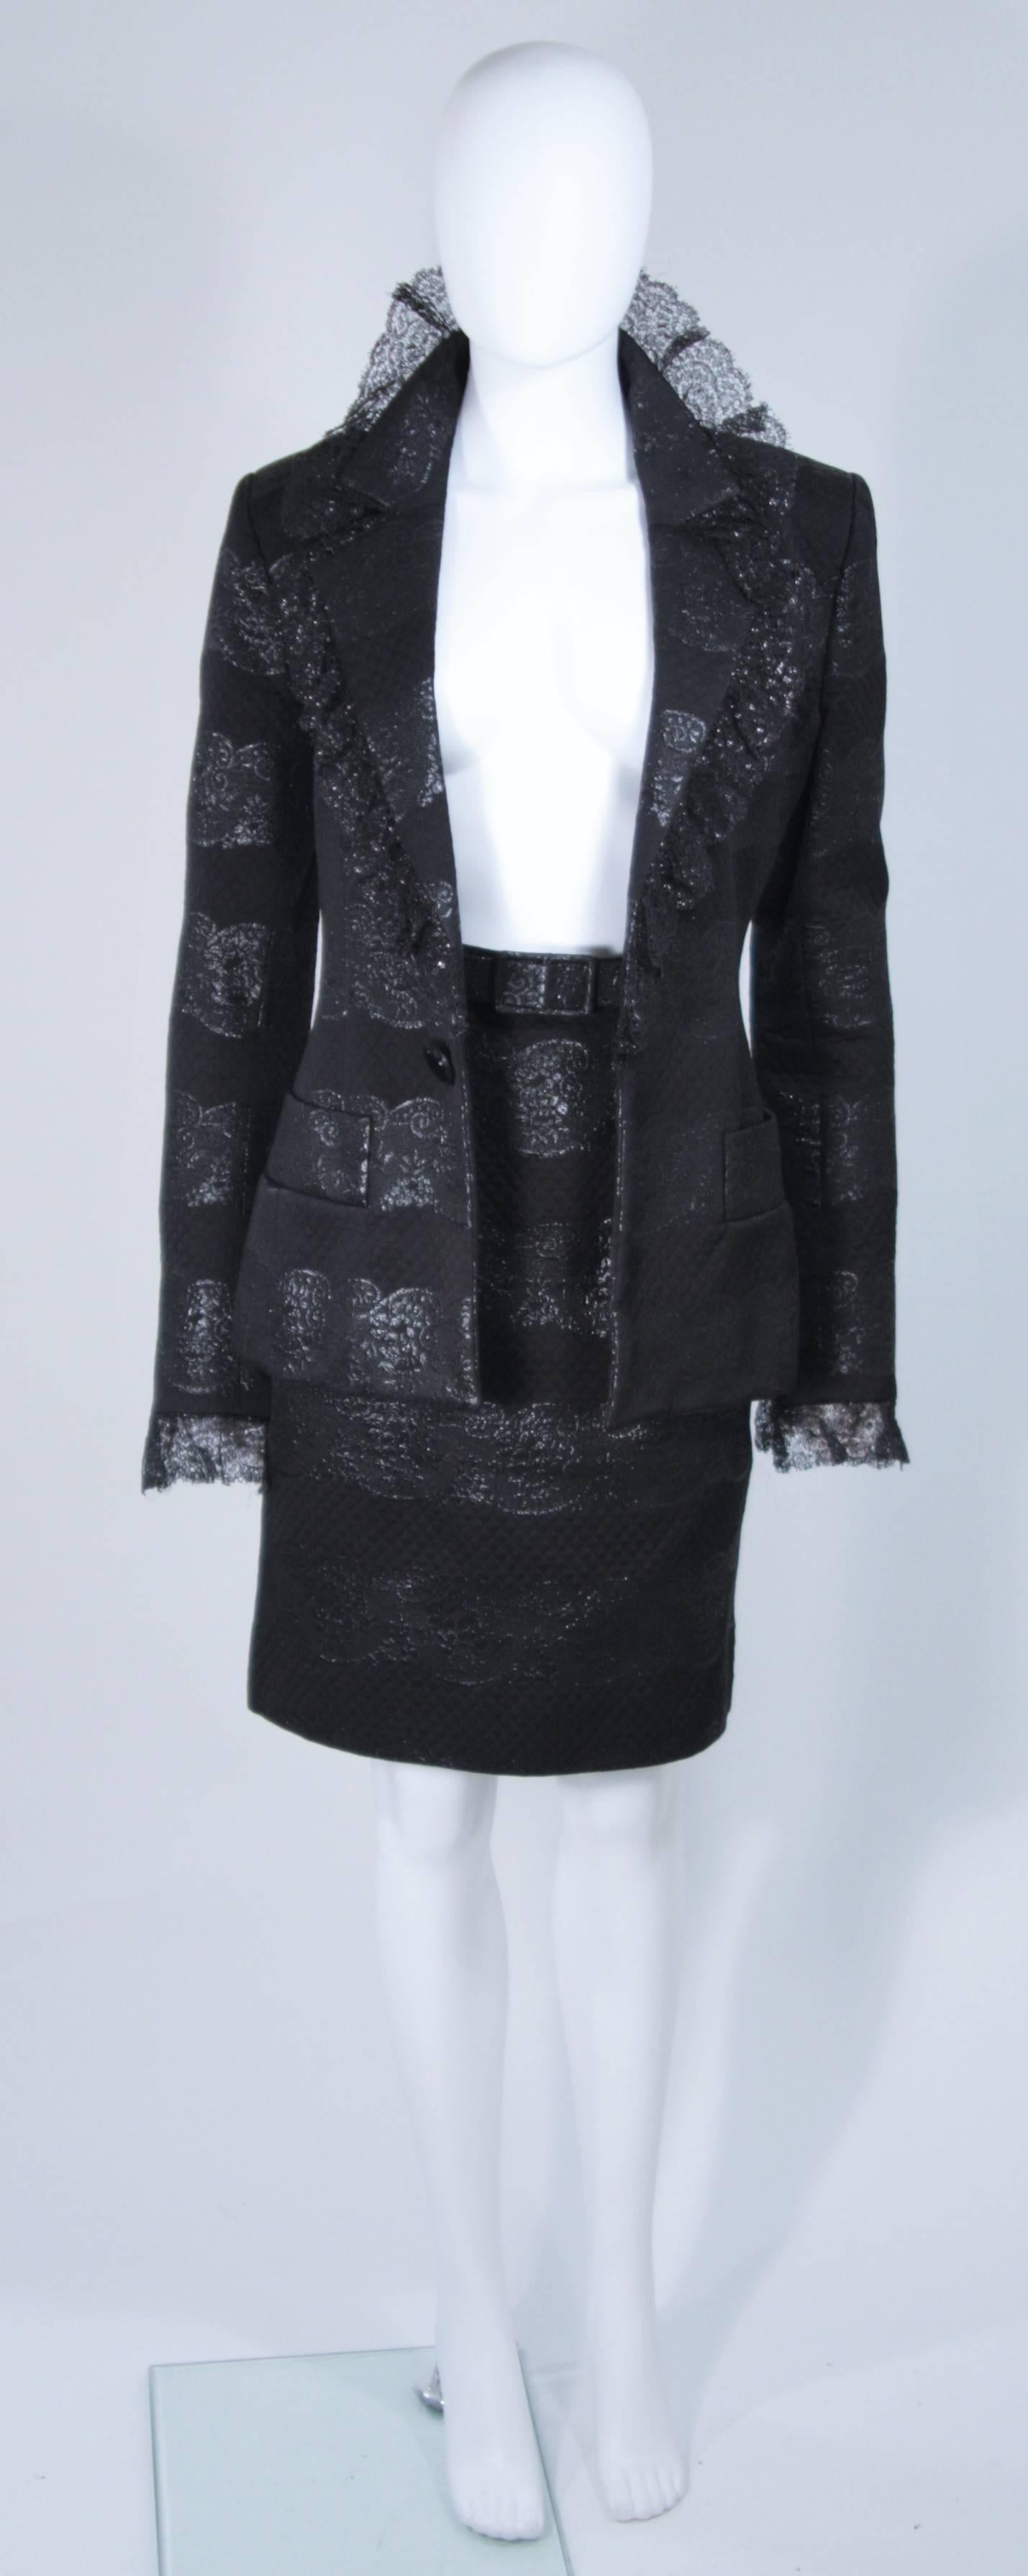  This Jacqueline De Ribes Couture skirt suit is composed of a black textured silk with lame patterning and lace trim. The jacket has an open style with pockets. The pencil style skirt has a zipper closure. In excellent vintage condition. 

